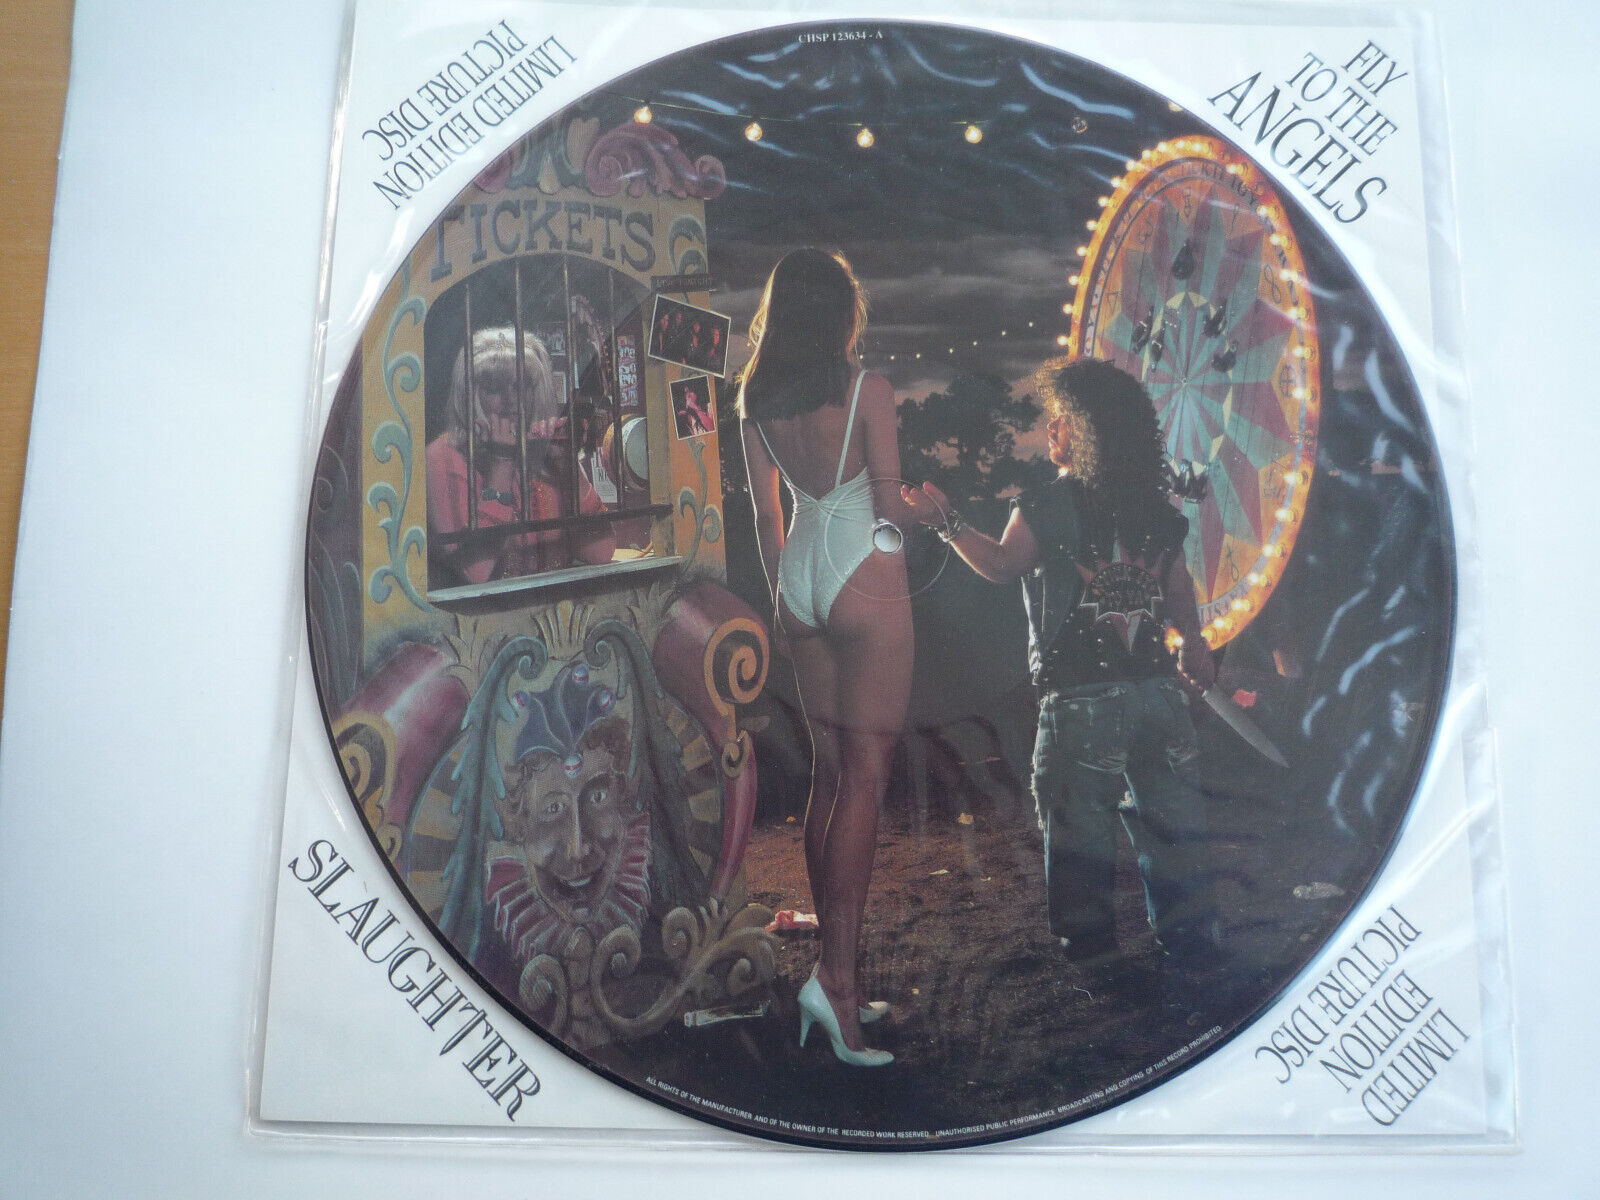 SLAUGHTER  FLY TO THE ANGELS - PICTURE DISC  - 3 TRACKS - UNPLAYED